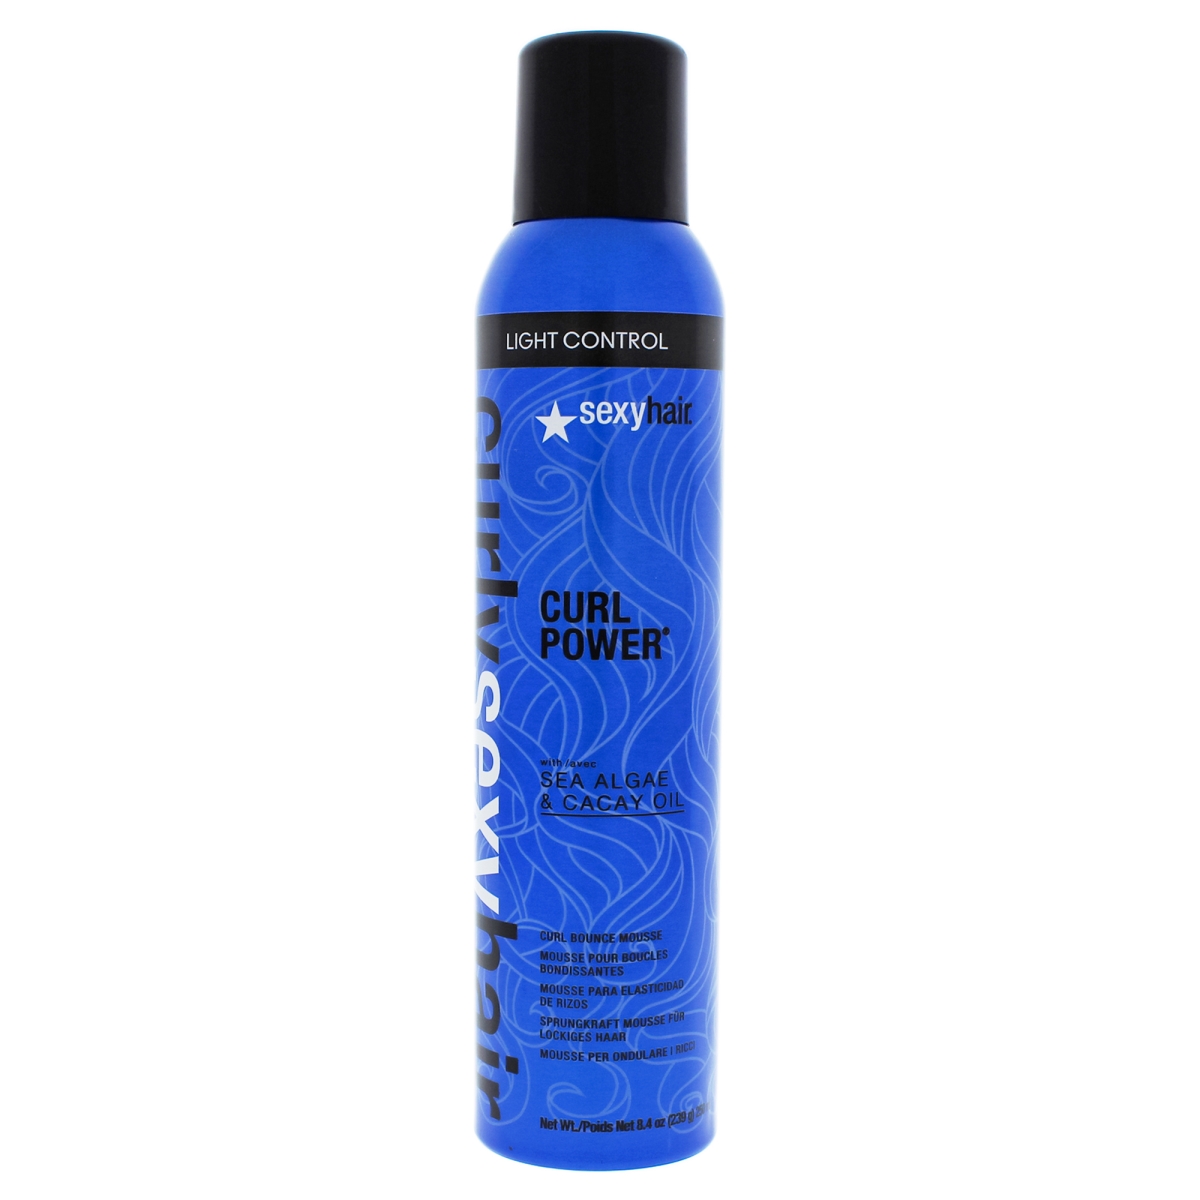 U-hc-13469 Curly Sexy Curl Power Mousse For Unisex - 8.4 Oz